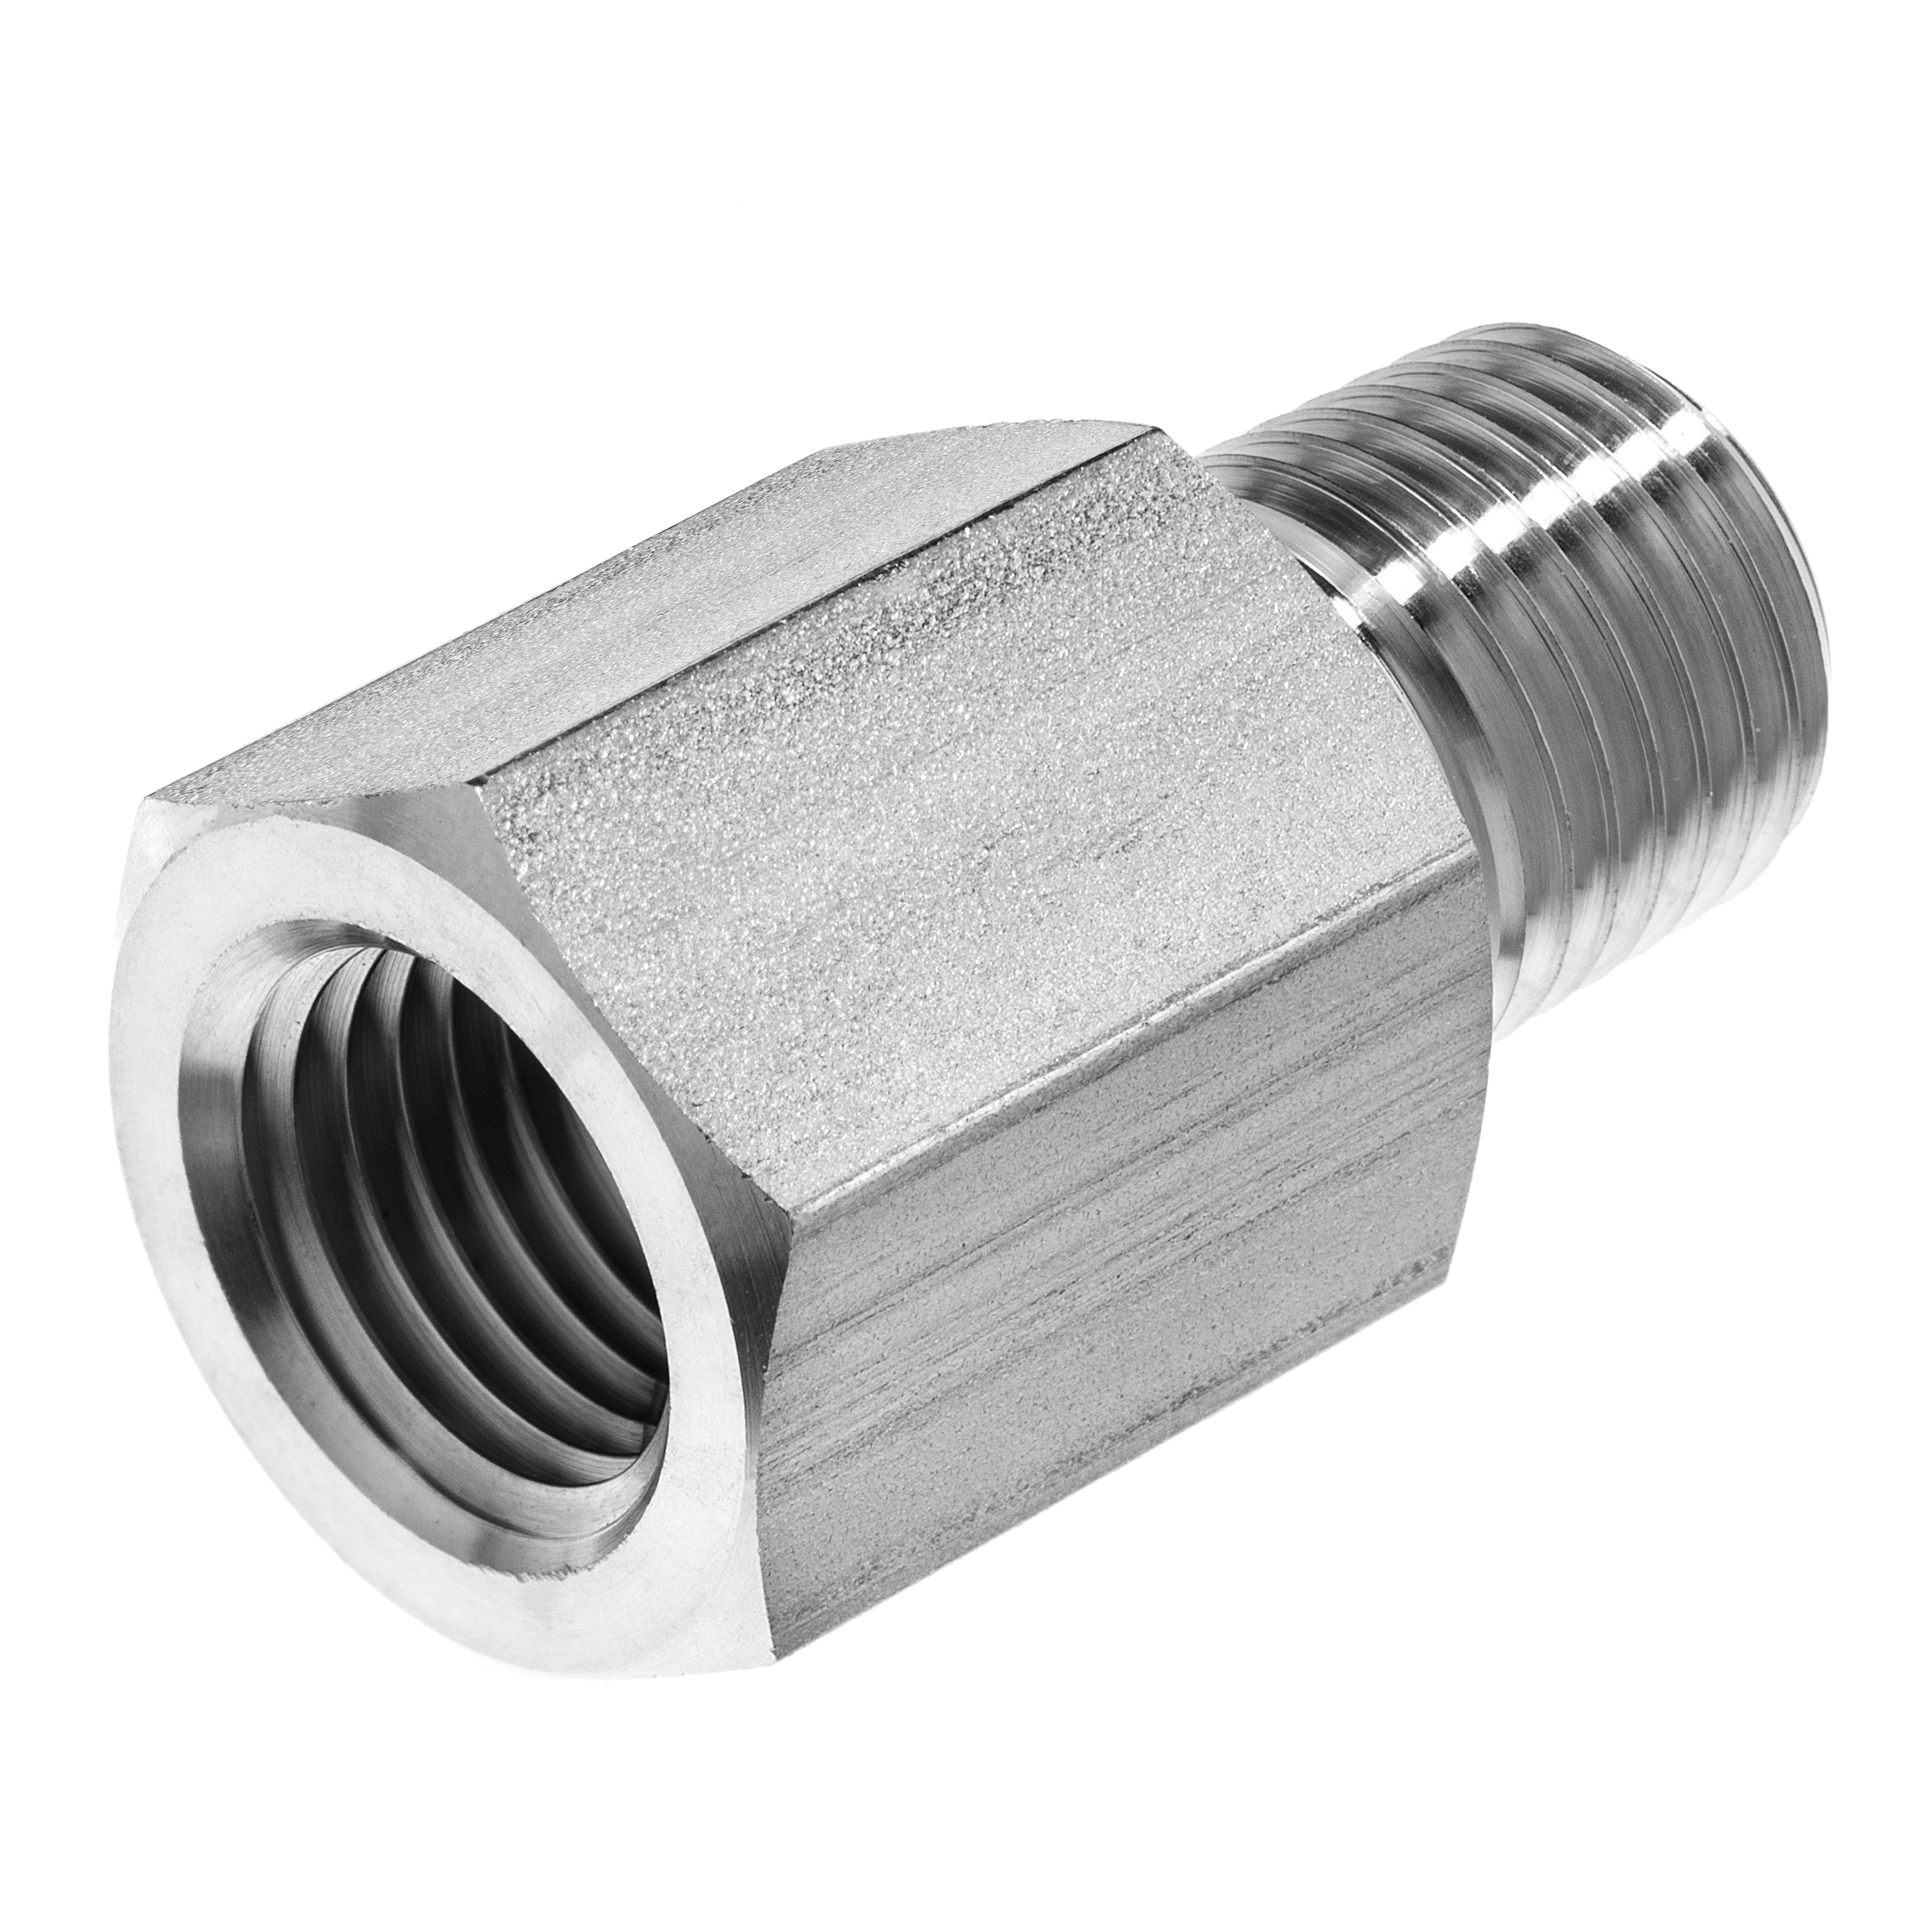 316 Stainless Steel Adapter Instrumentation Pipe Fitting Female NPT x Male BSPP ZUSA-PF-8751